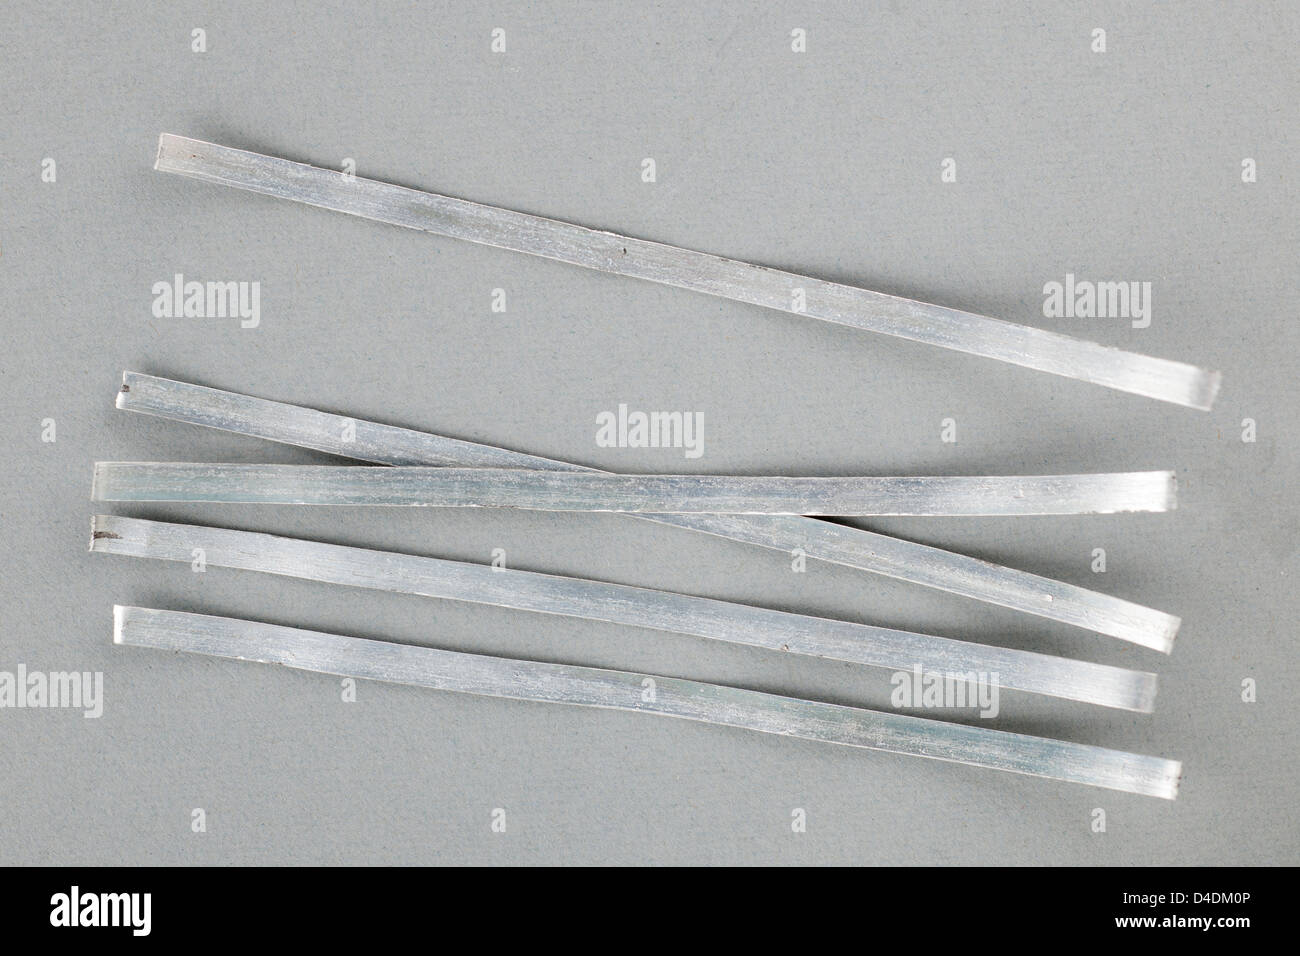 Five strips of Magnesium ribbon Stock Photo